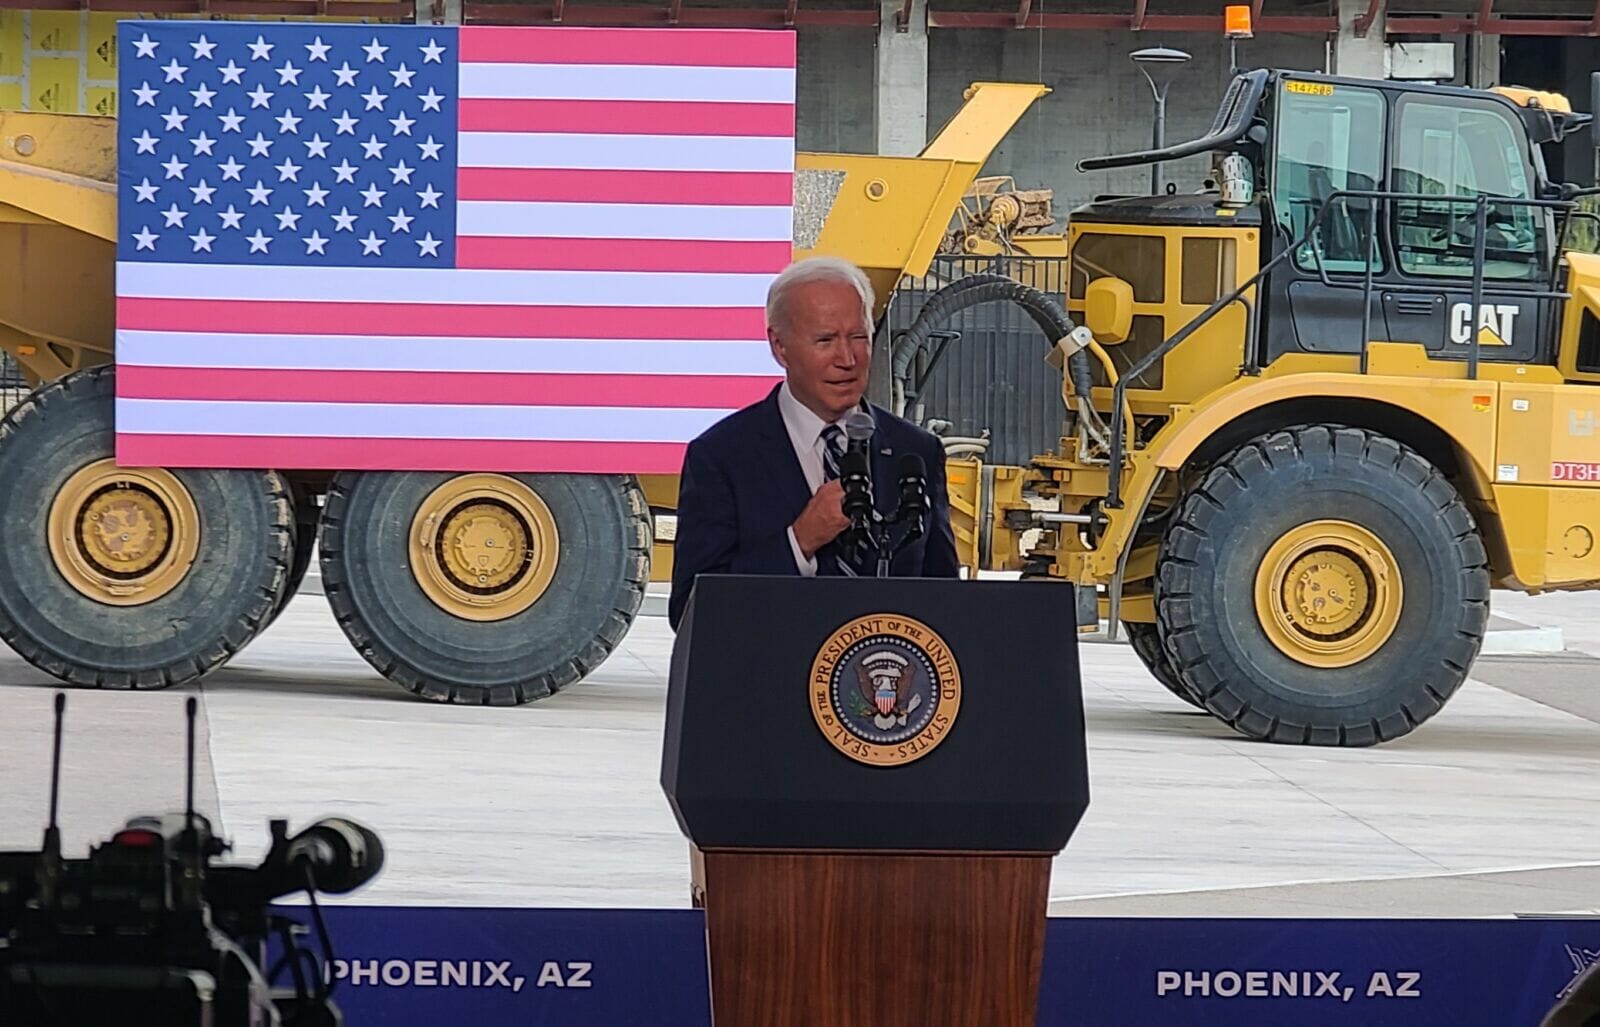 In Biden's TSMC remarks, he named two local business owners who've benefitted from the president's focus on infrastructure and manufacturing.